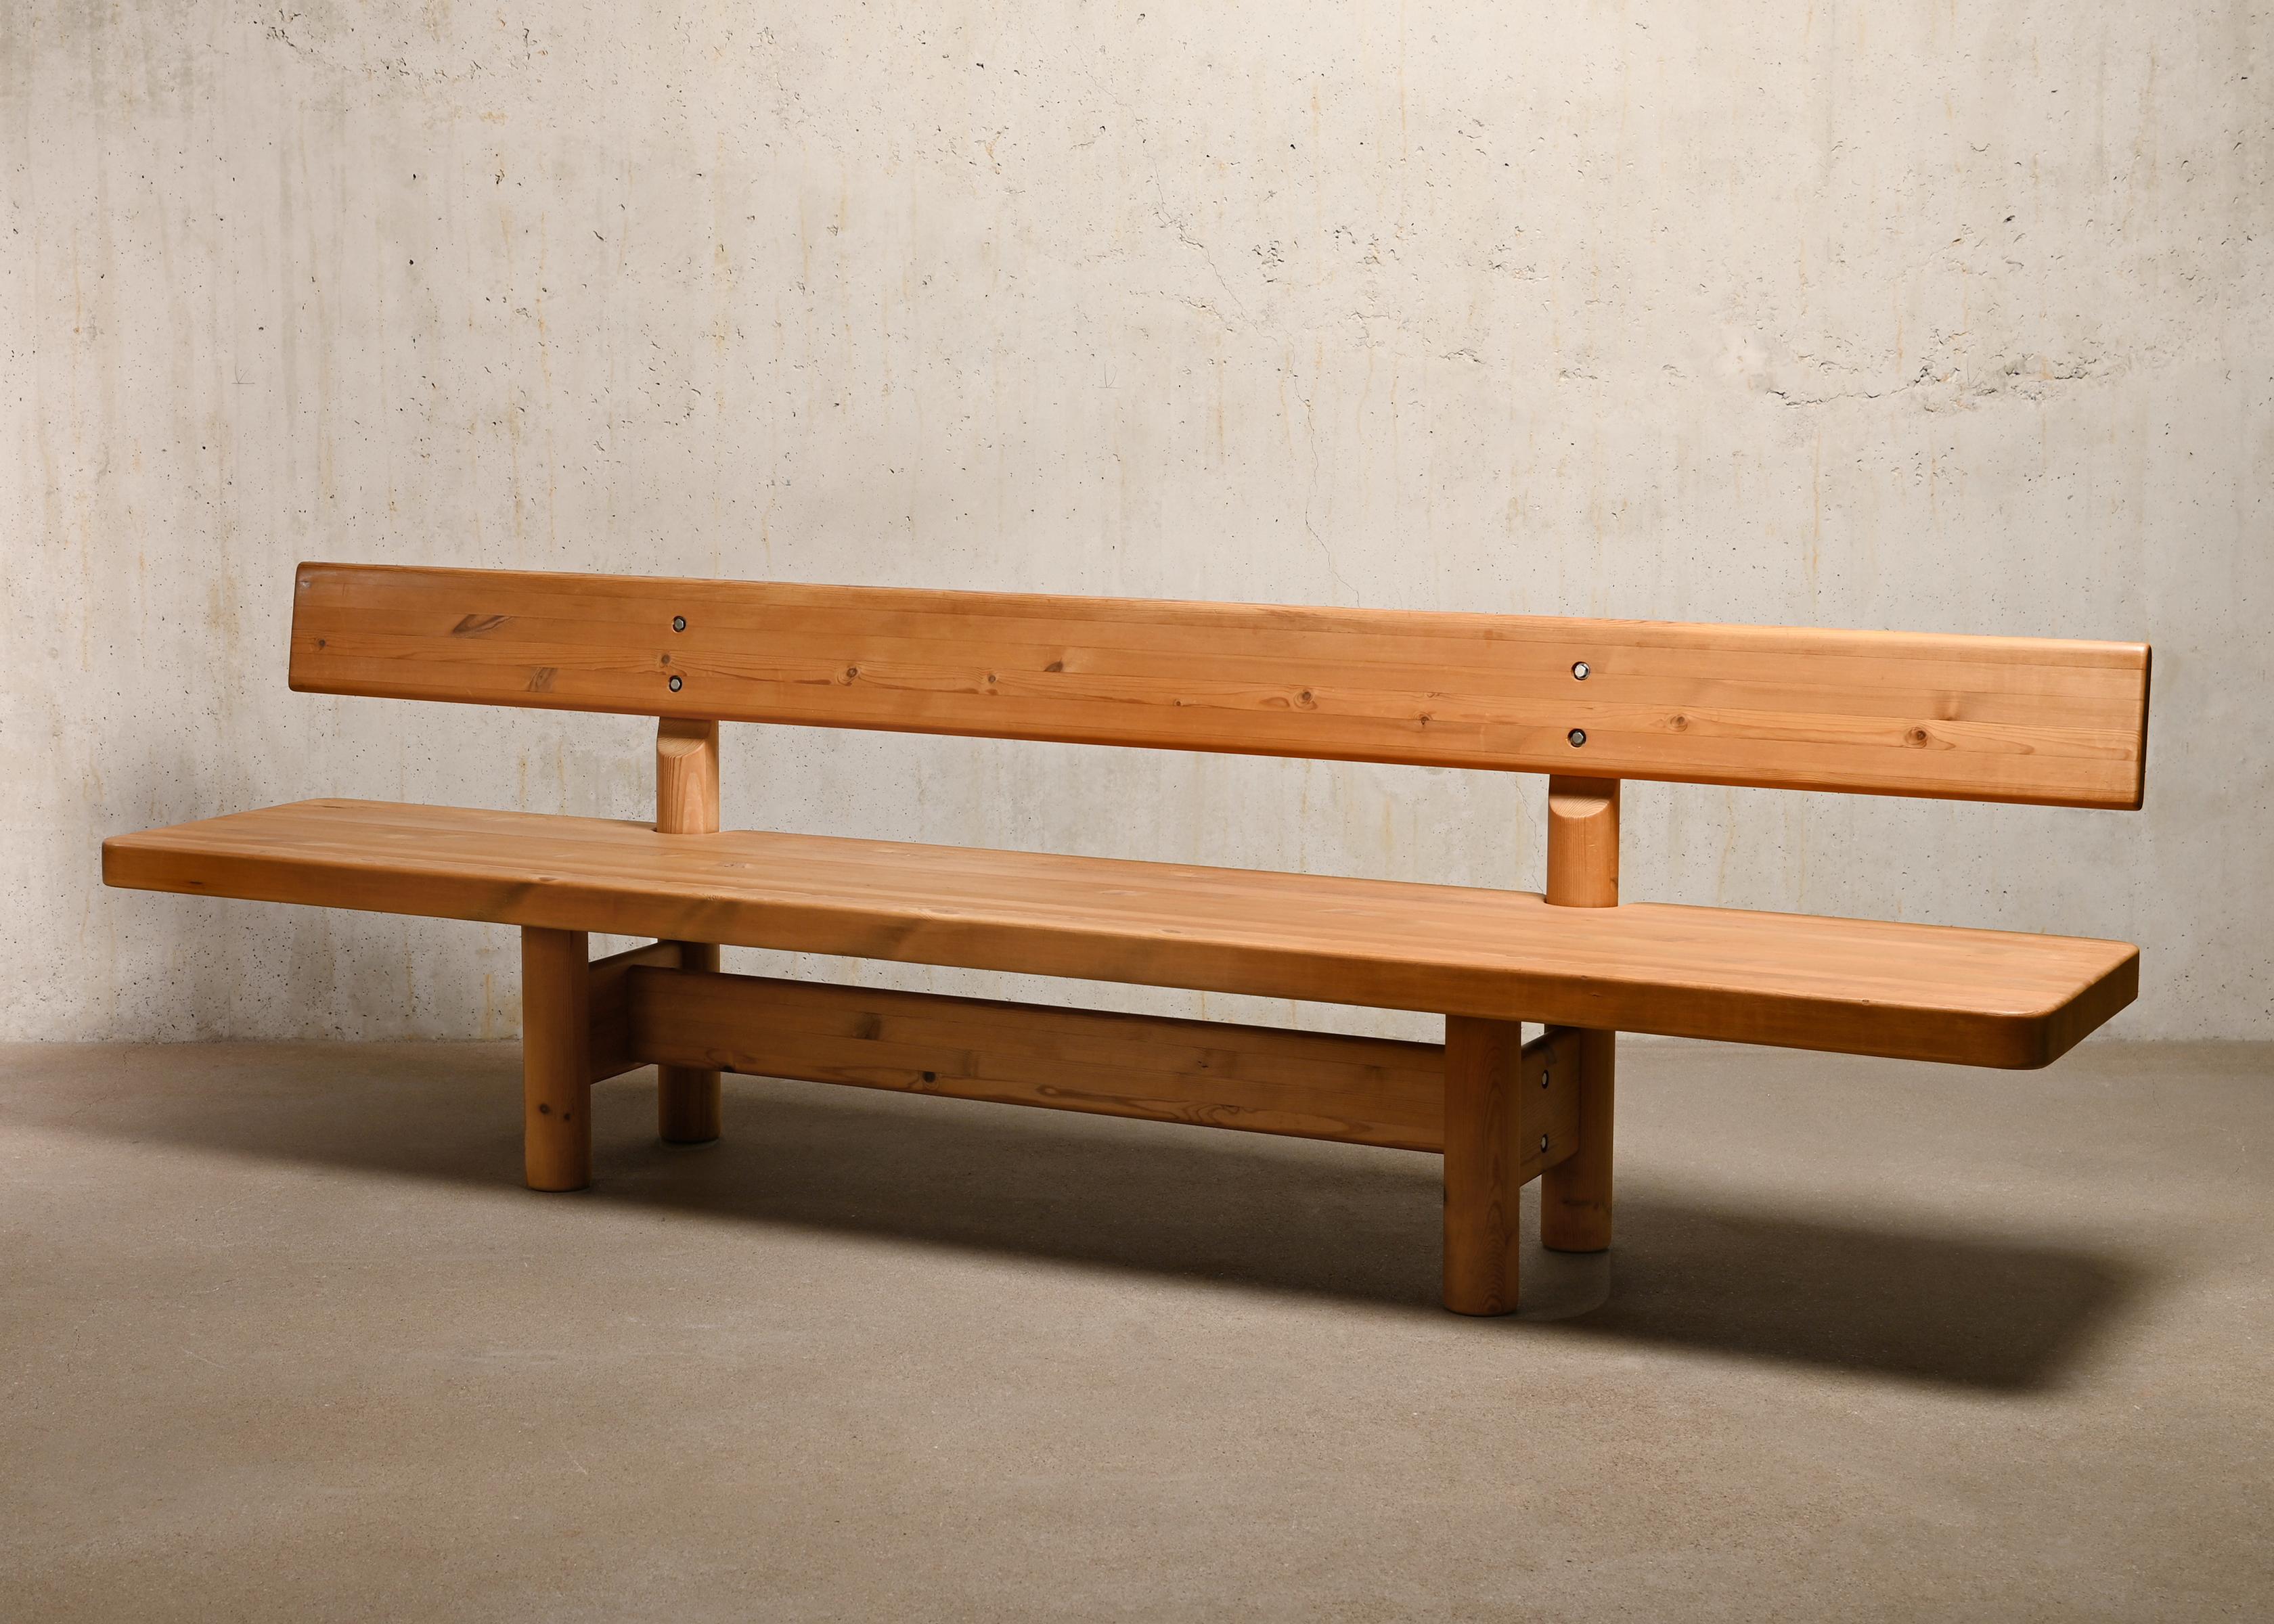 Large solid Pine wood bench designed by Danish architects Knud Friis & Elmar Moltke Nielsen in 1978 and manufactured by Hirtshals Savvaerk. The design can be described as mild Danish Brutalism and has clean lines and is very functional. Both the